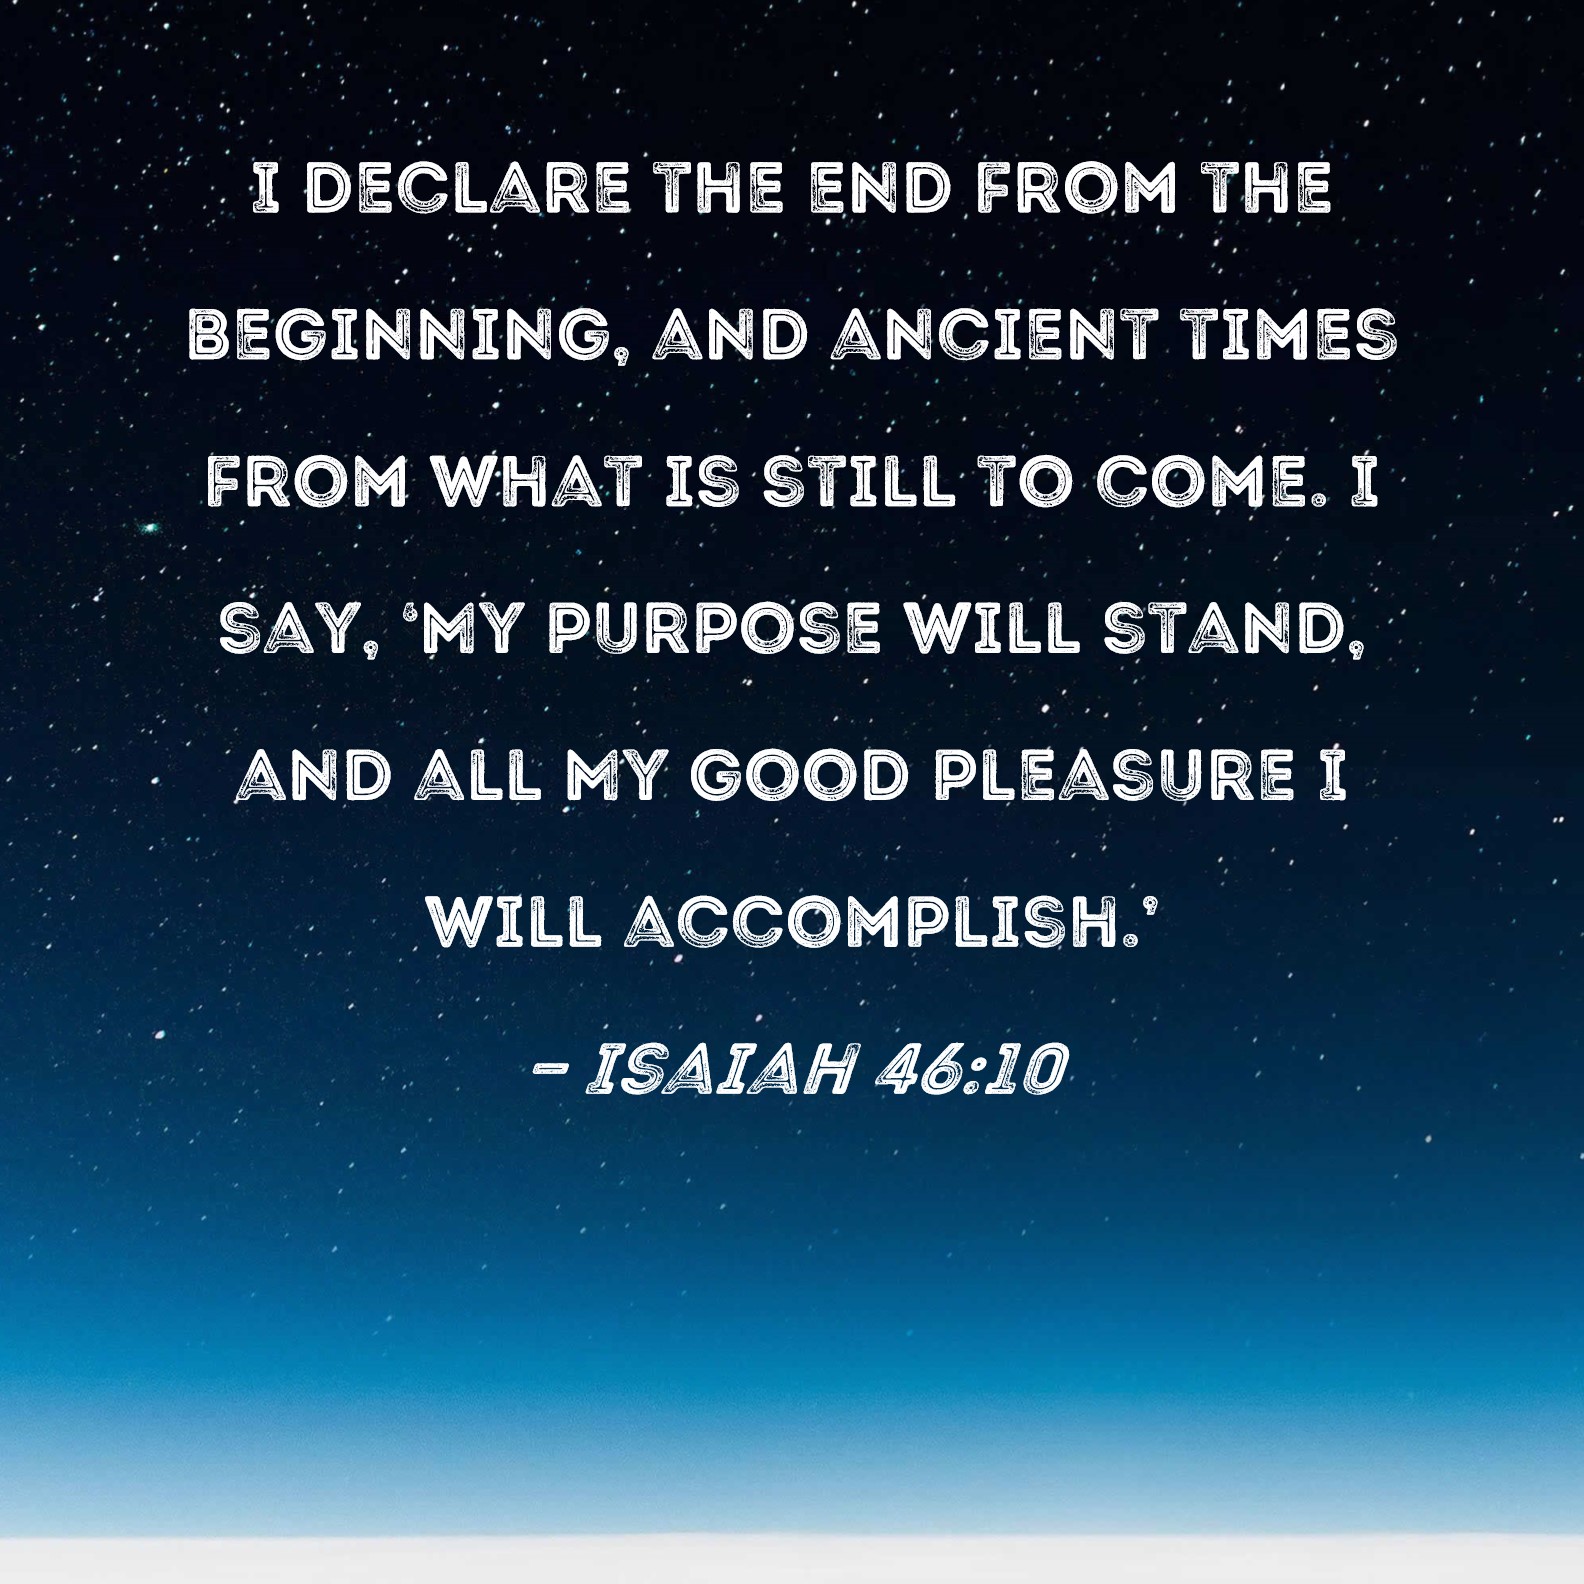 Isaiah 46:10 I declare the end from the beginning, and ancient